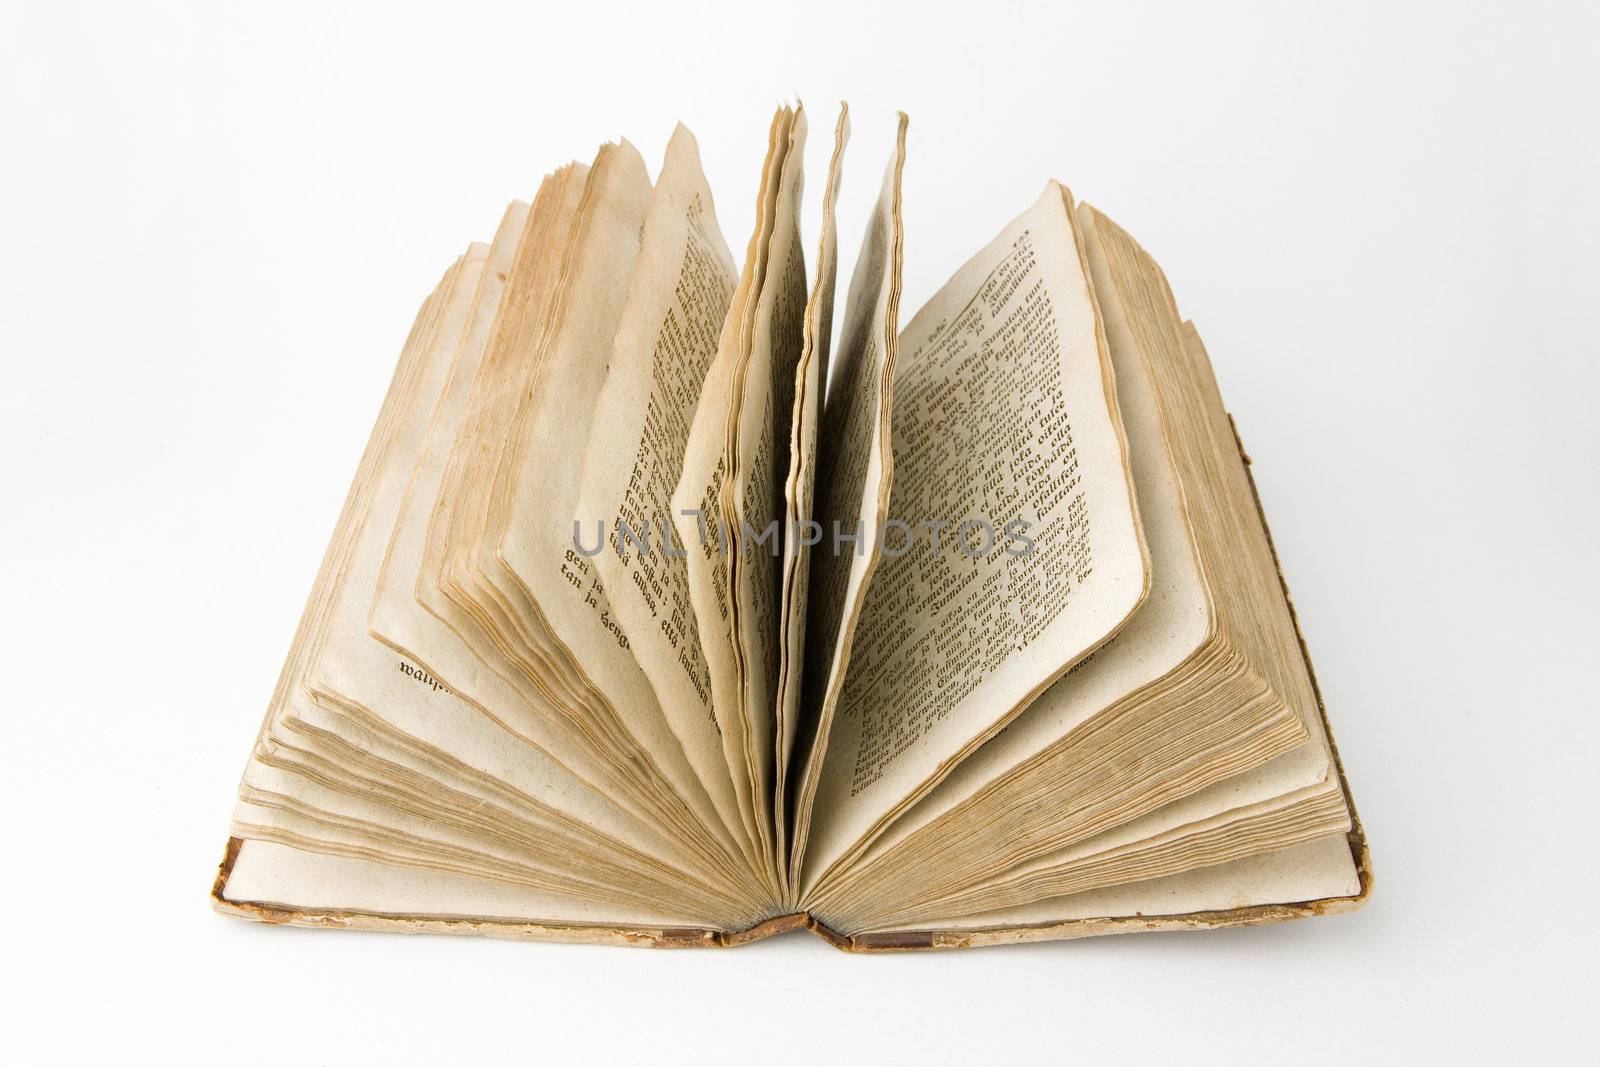 Open antique book on a white background